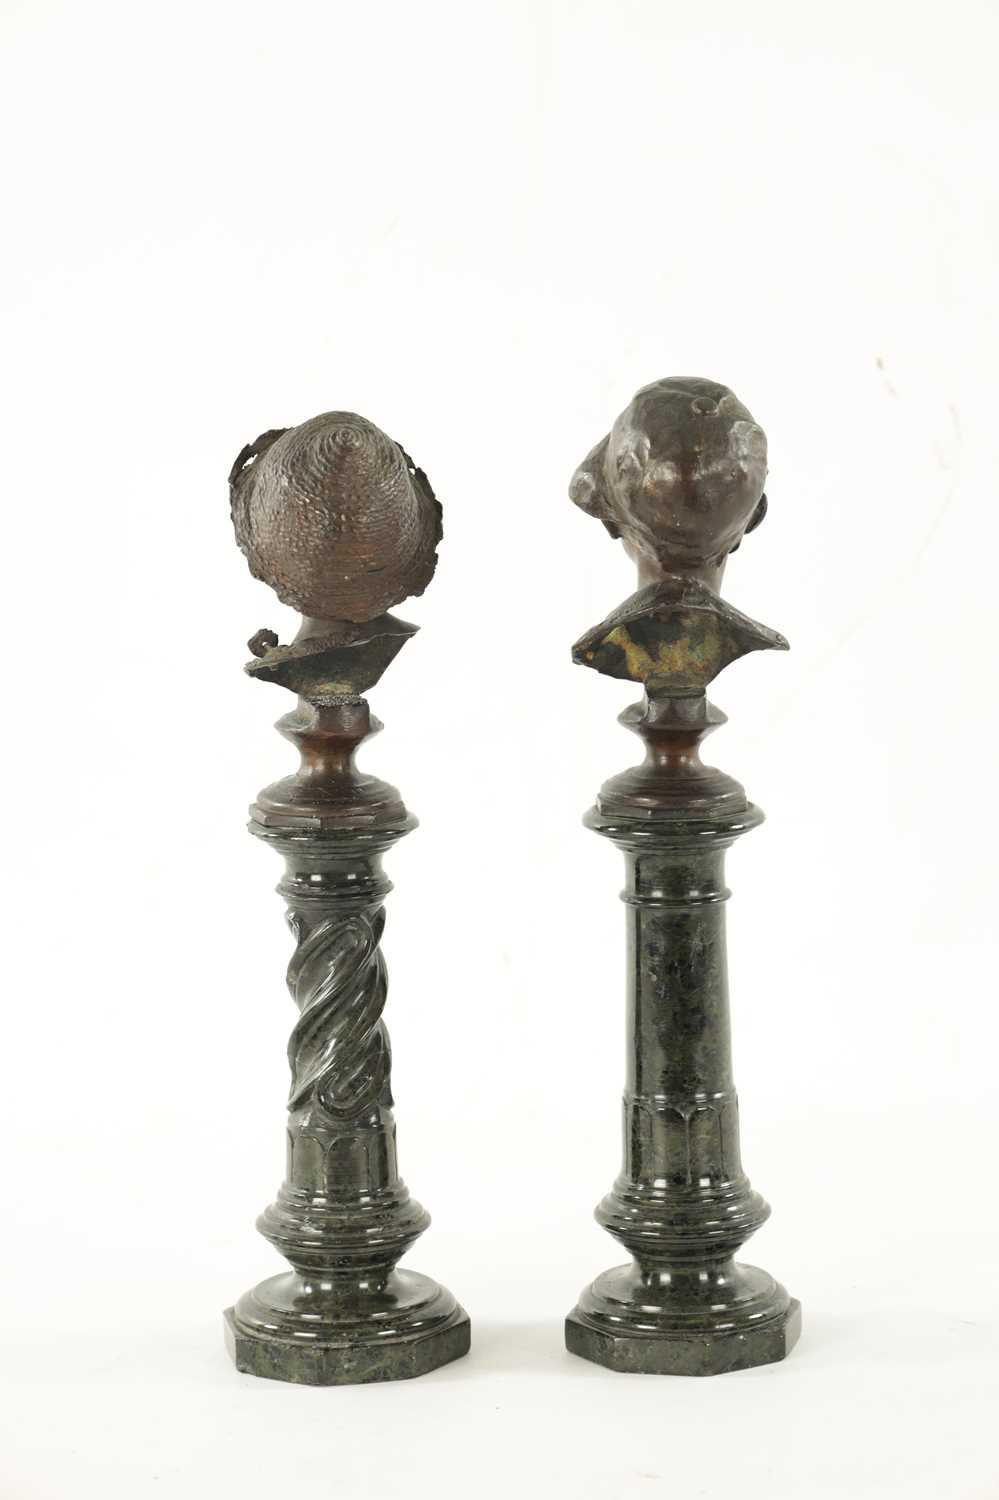 A MATCHED PAIR OF LATE 19TH CENTURY BRONZE MINIATURE BUSTS - Image 5 of 6